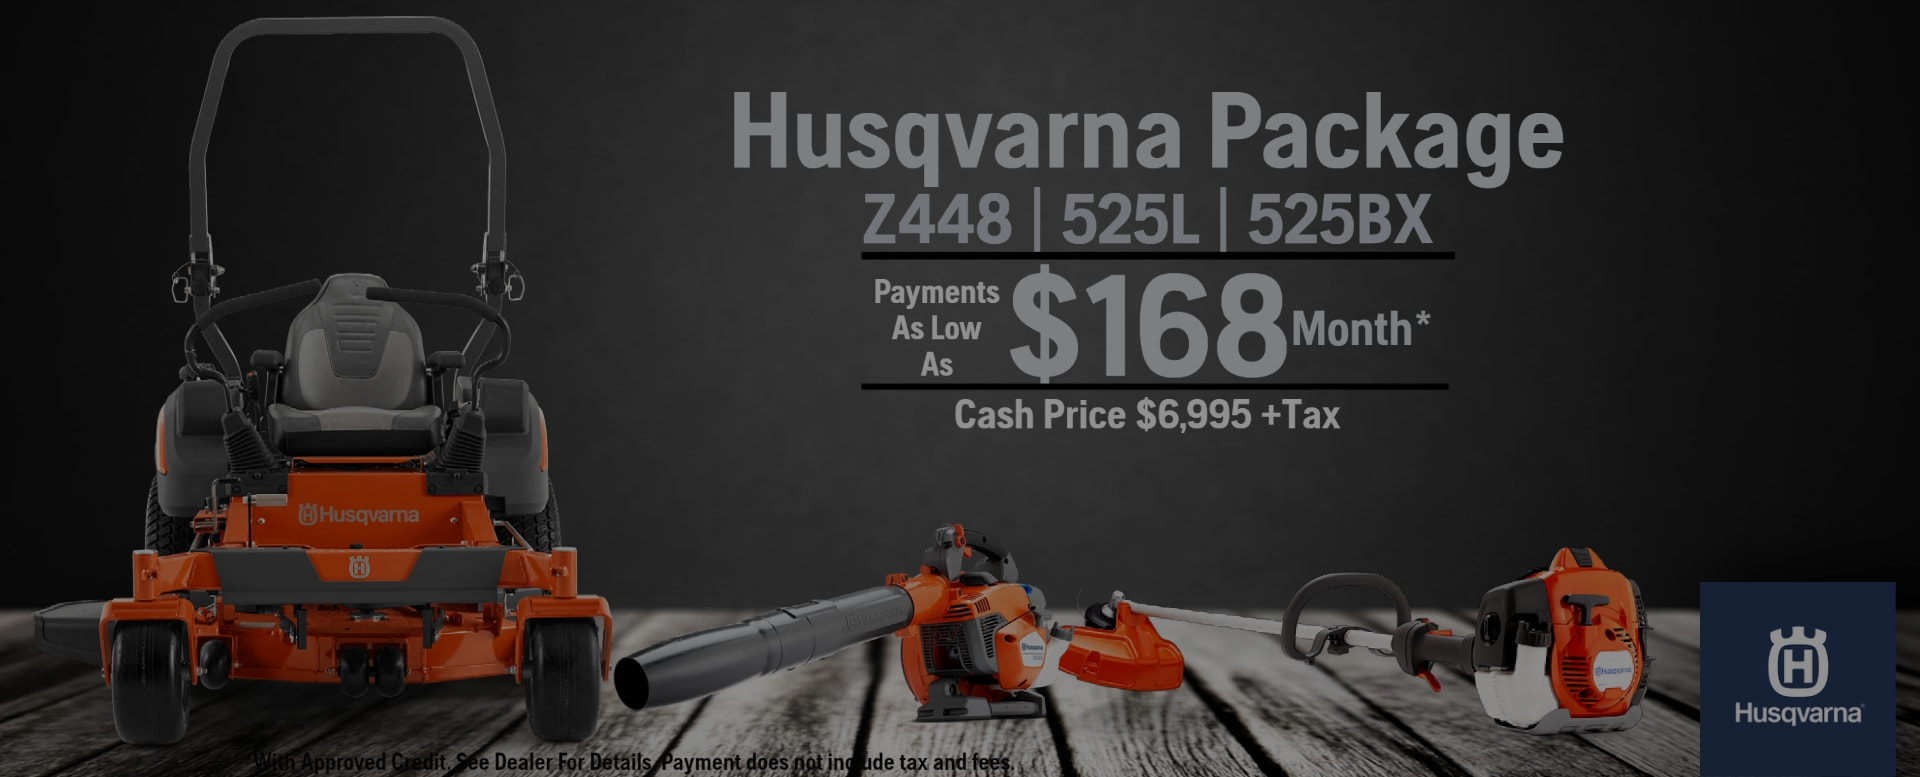 Husqvarna Package: Z448, 525L, and 525BX is available at Leslies Outdoor Power Equipment